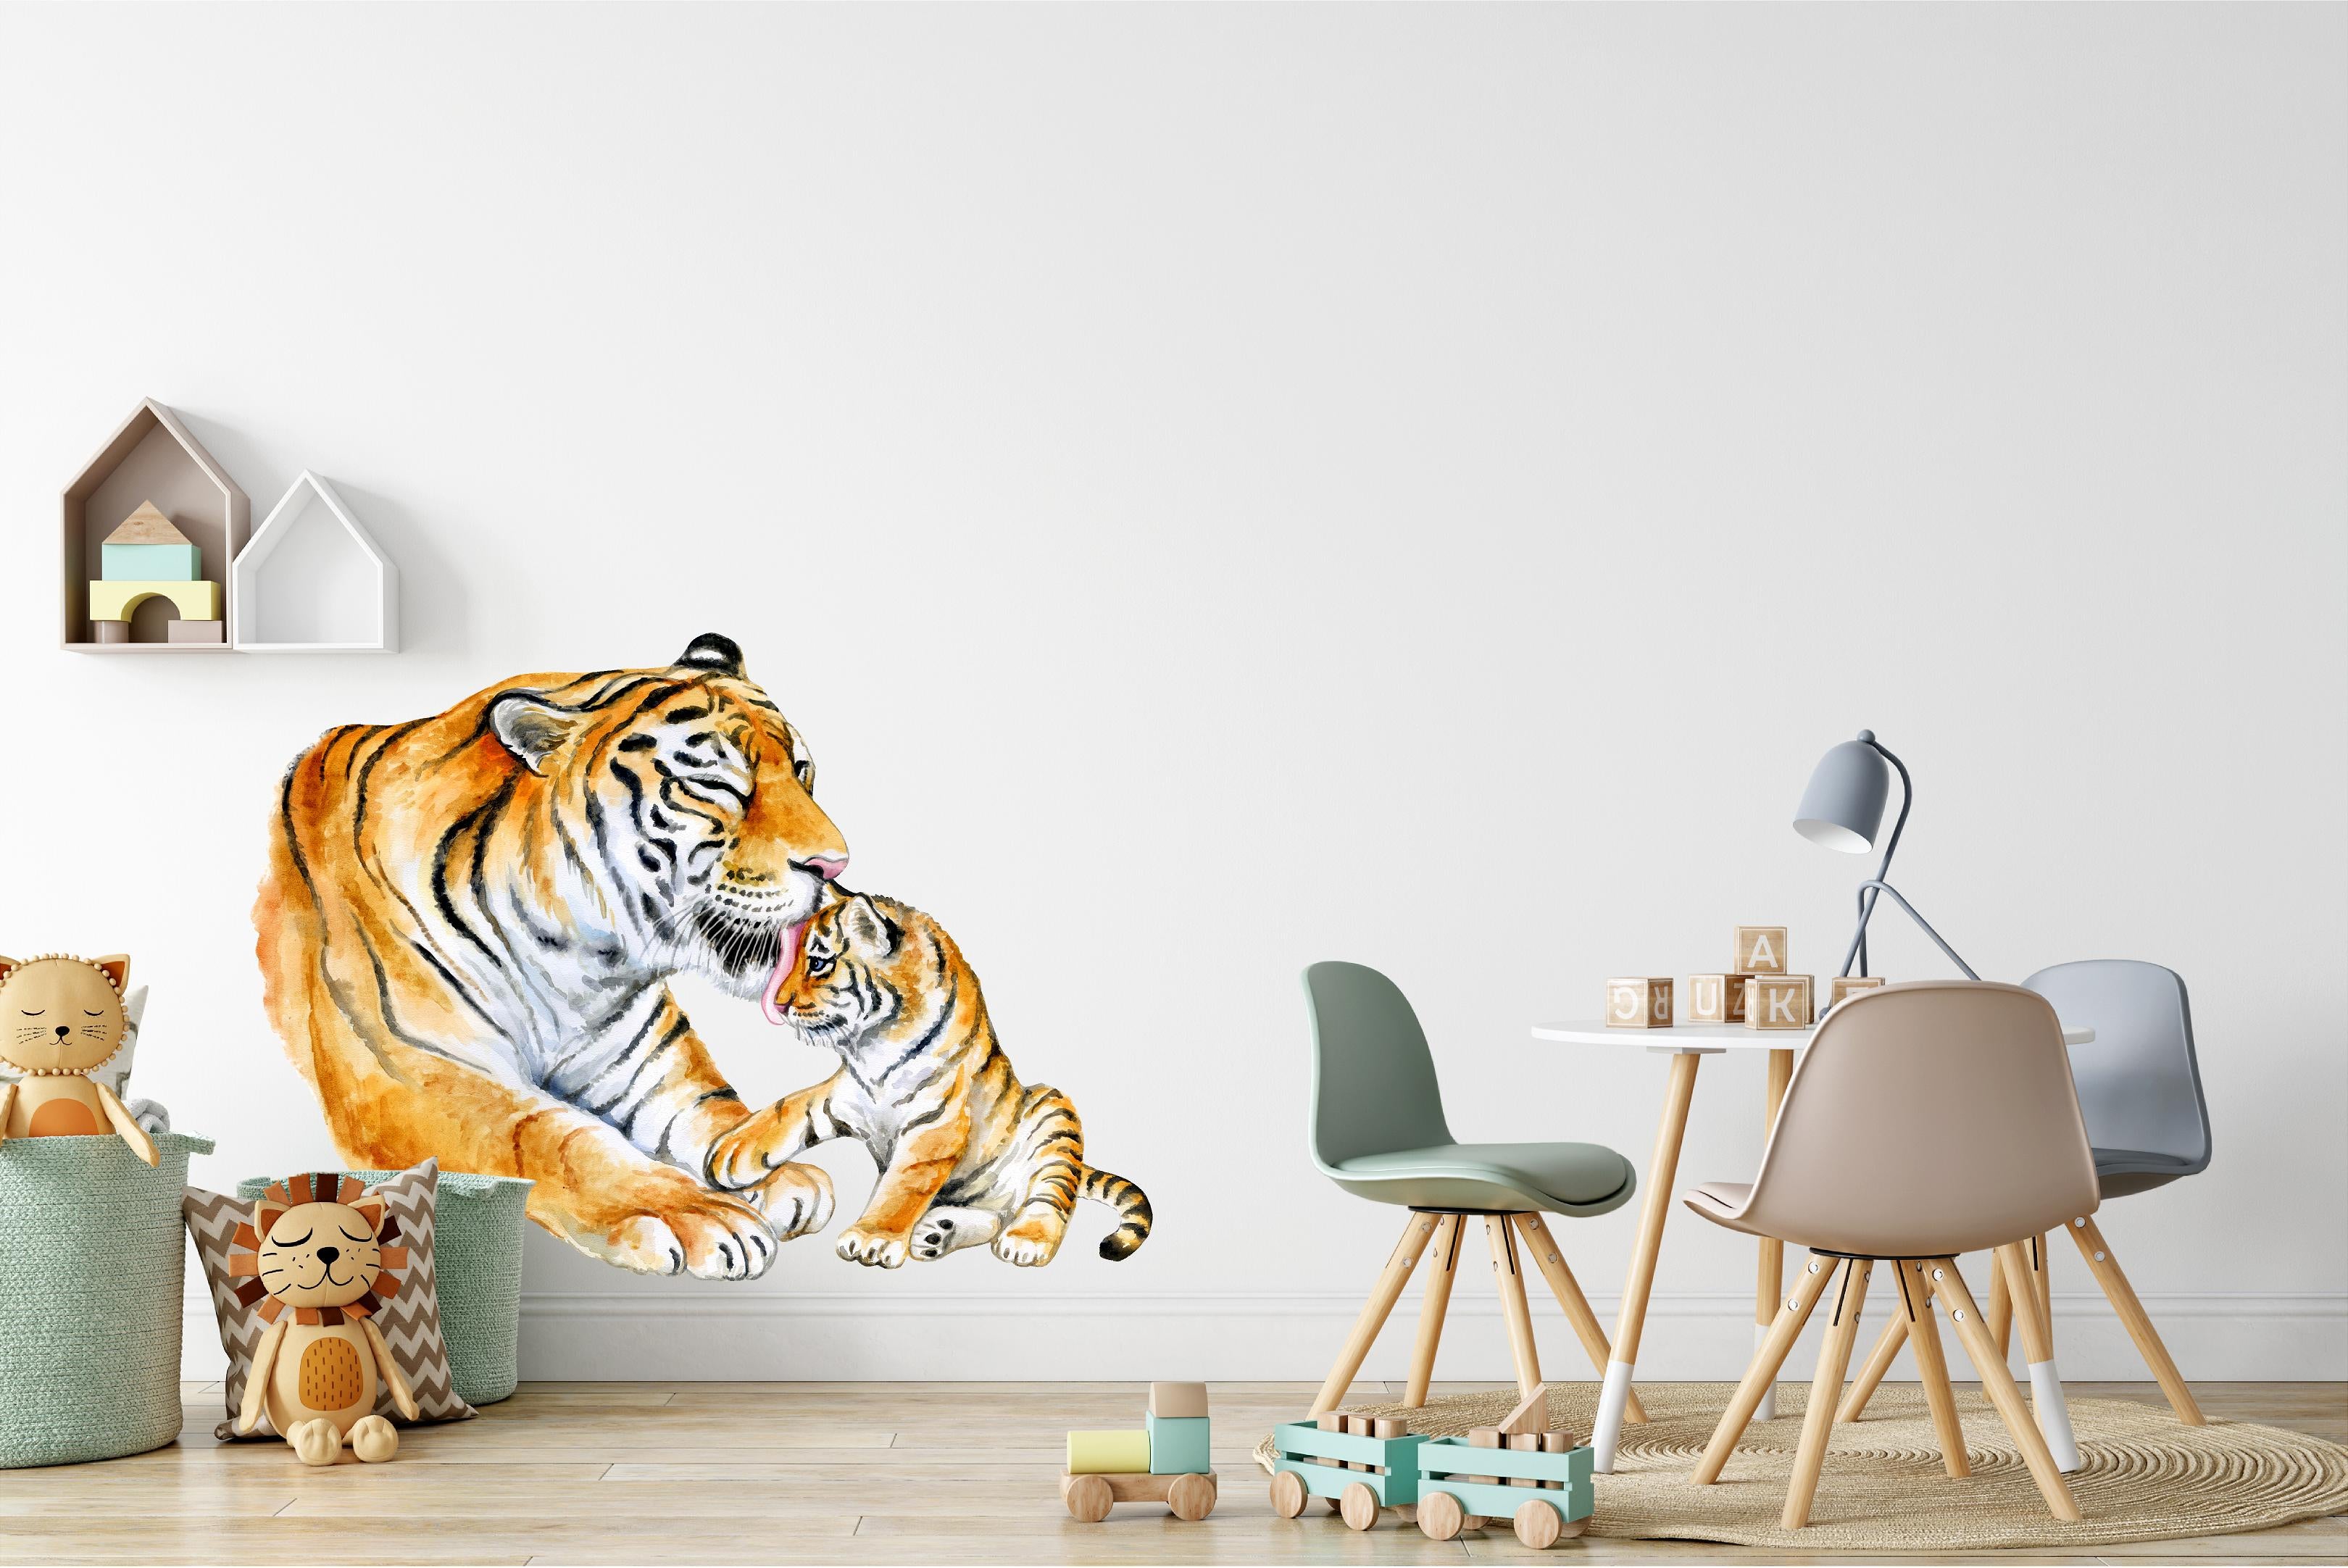 Mother Tiger Cleaning Baby Wall Decal Removable Fabric Vinyl Wall Sticker | DecalBaby